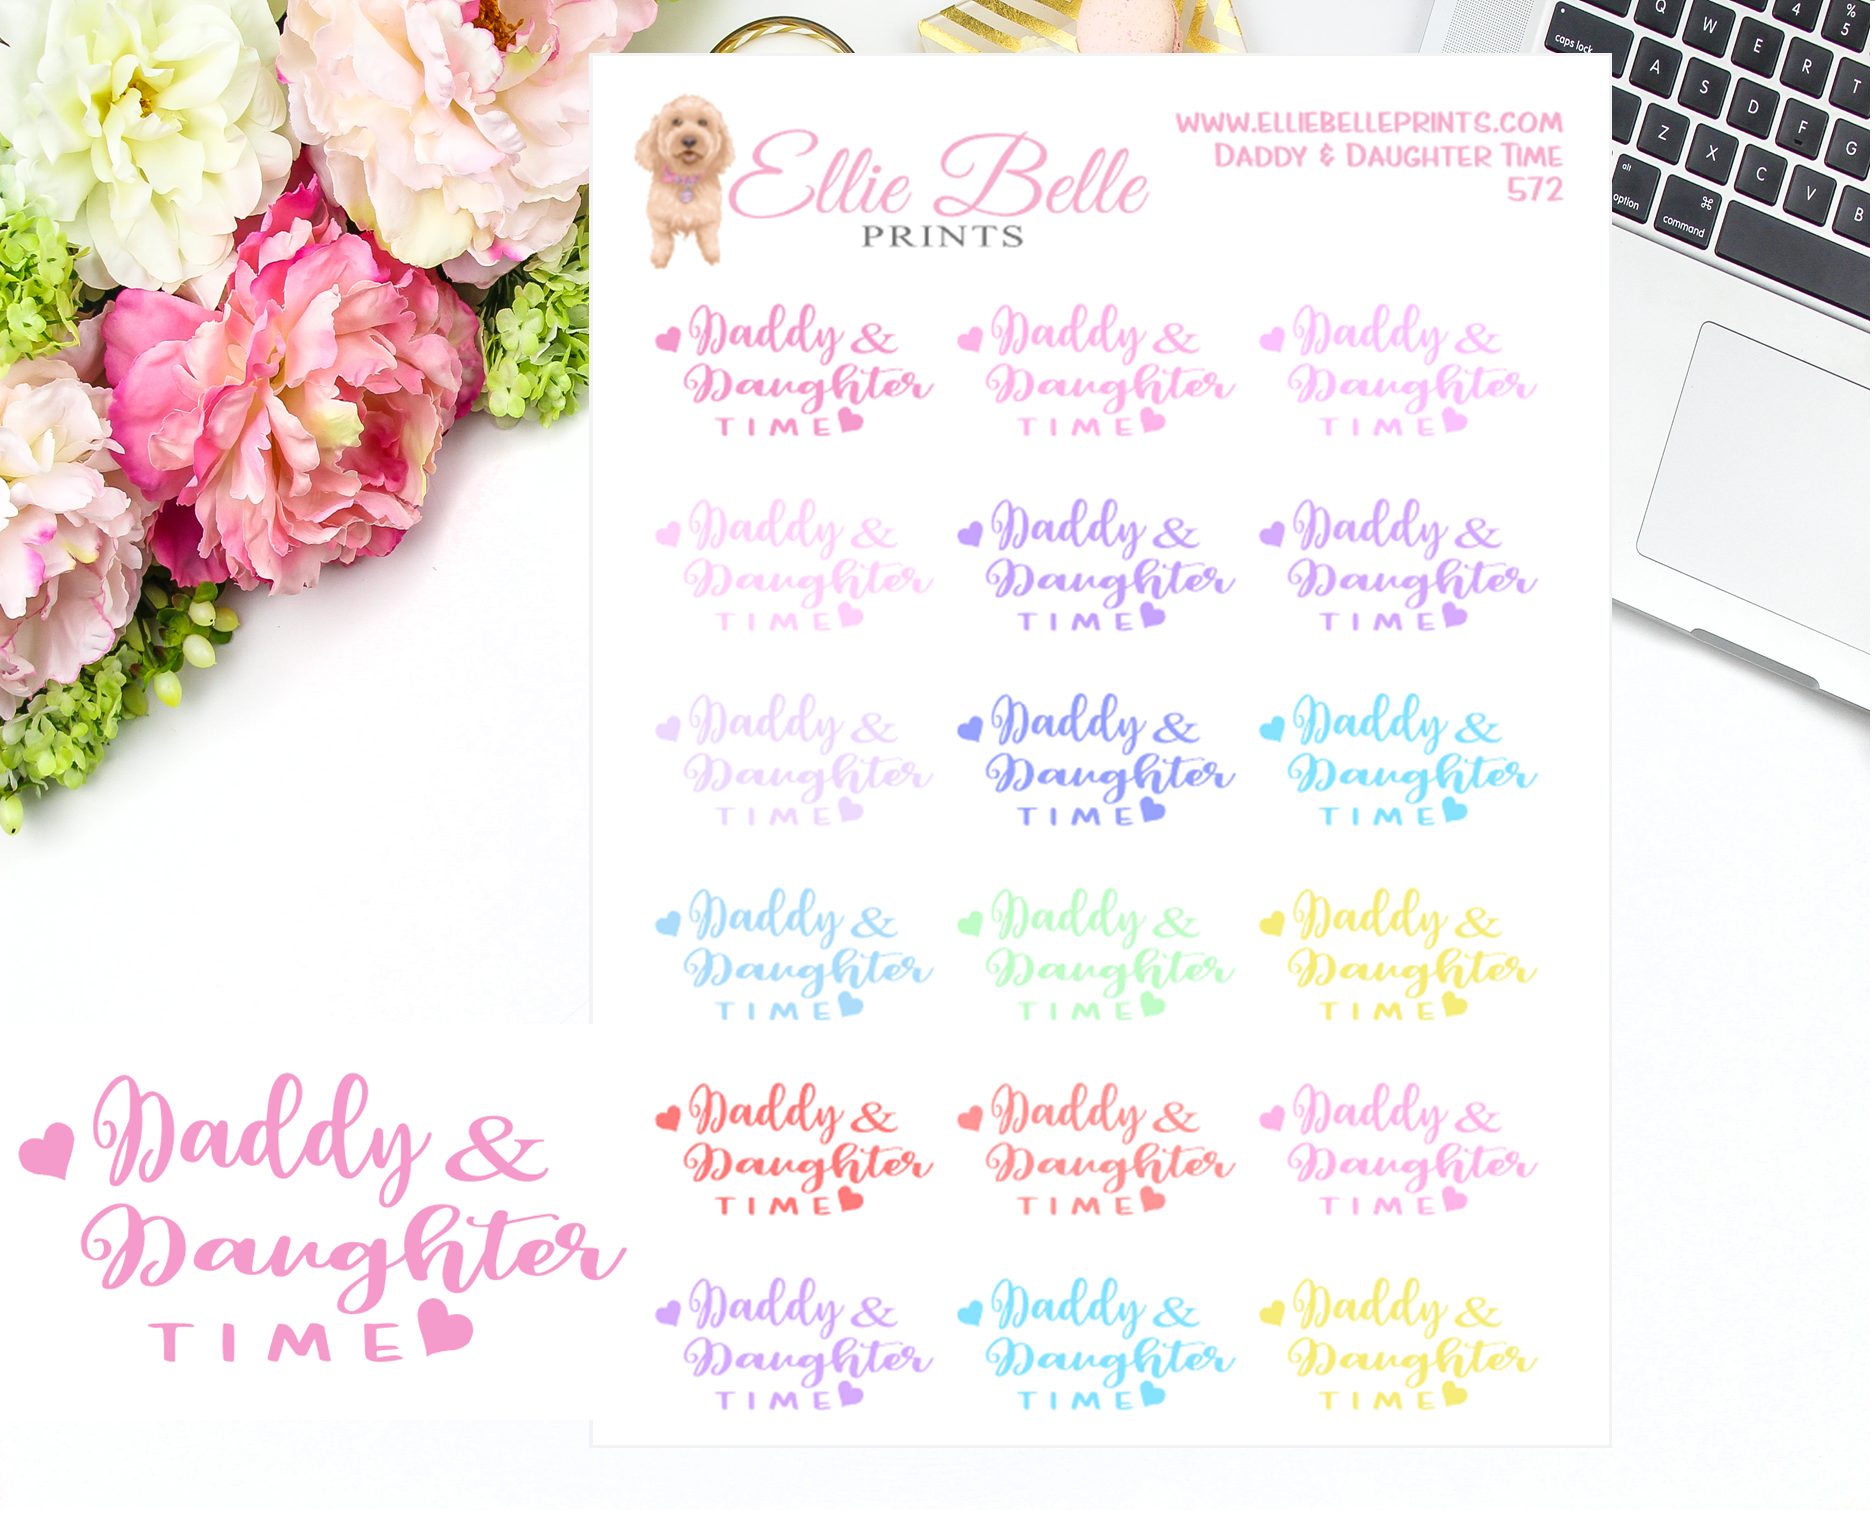 Daddy & Daughter Time Stickers